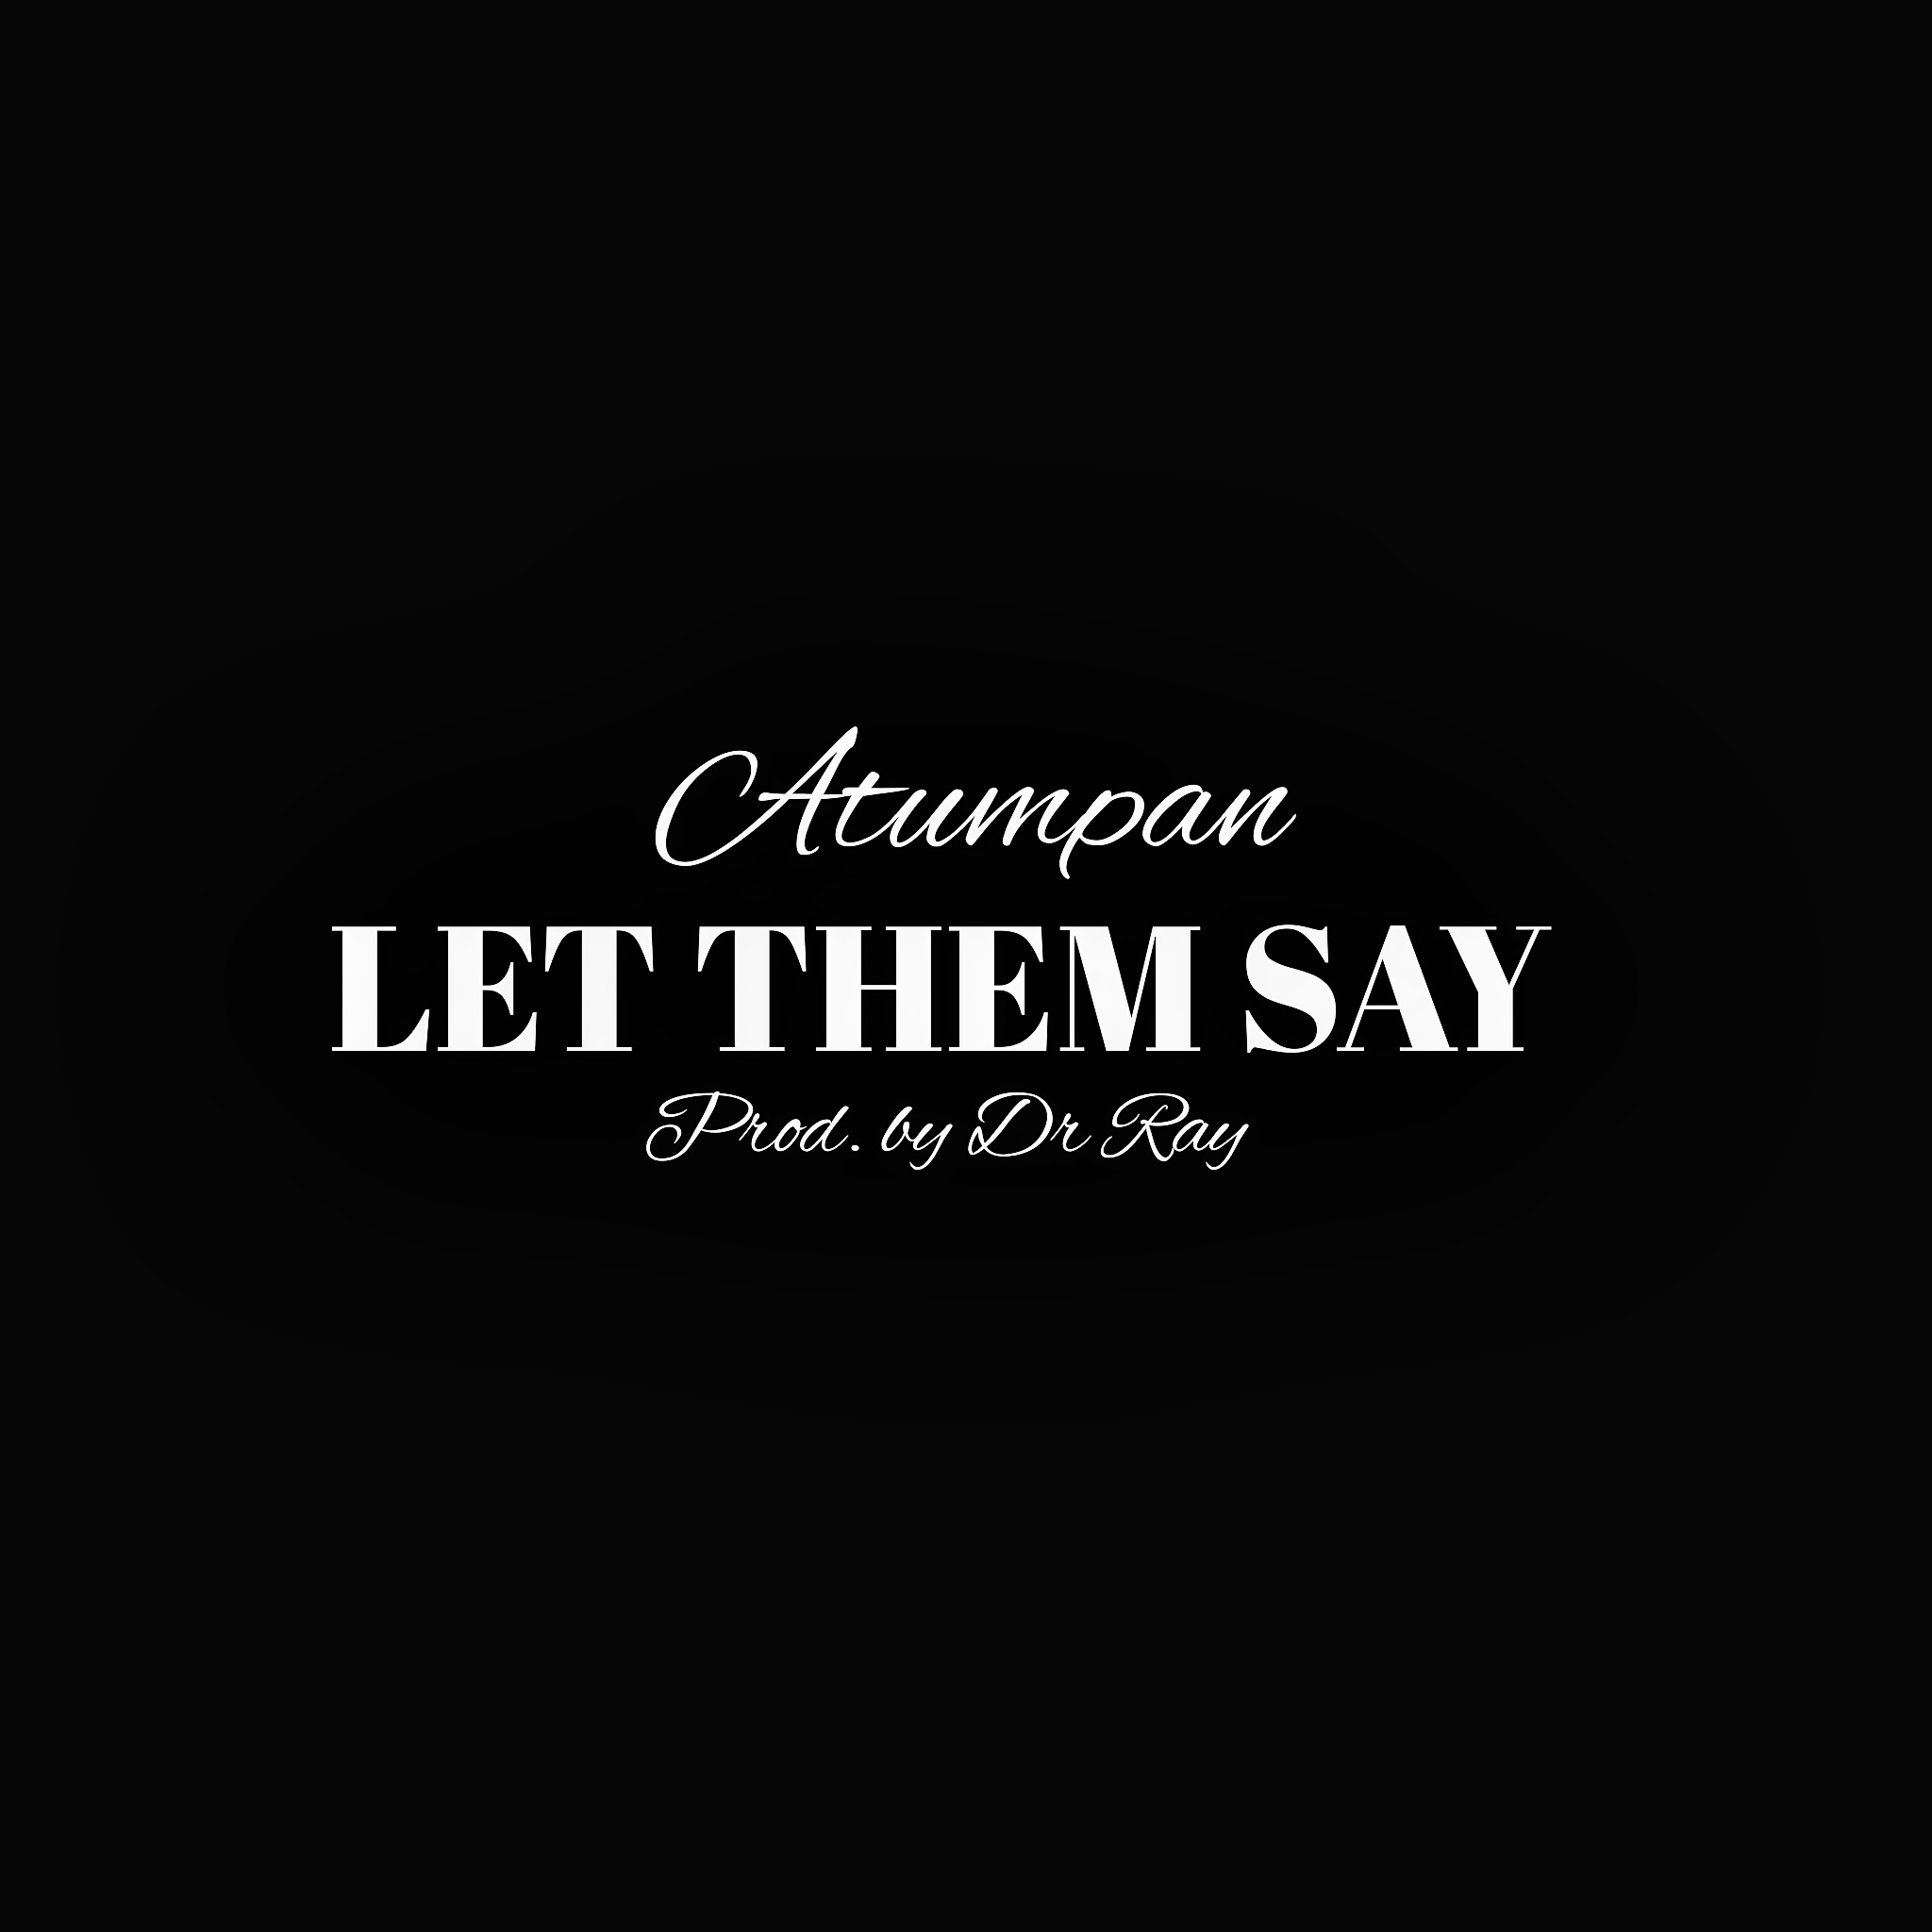 atumpan-let-them-say-prod-by-drray